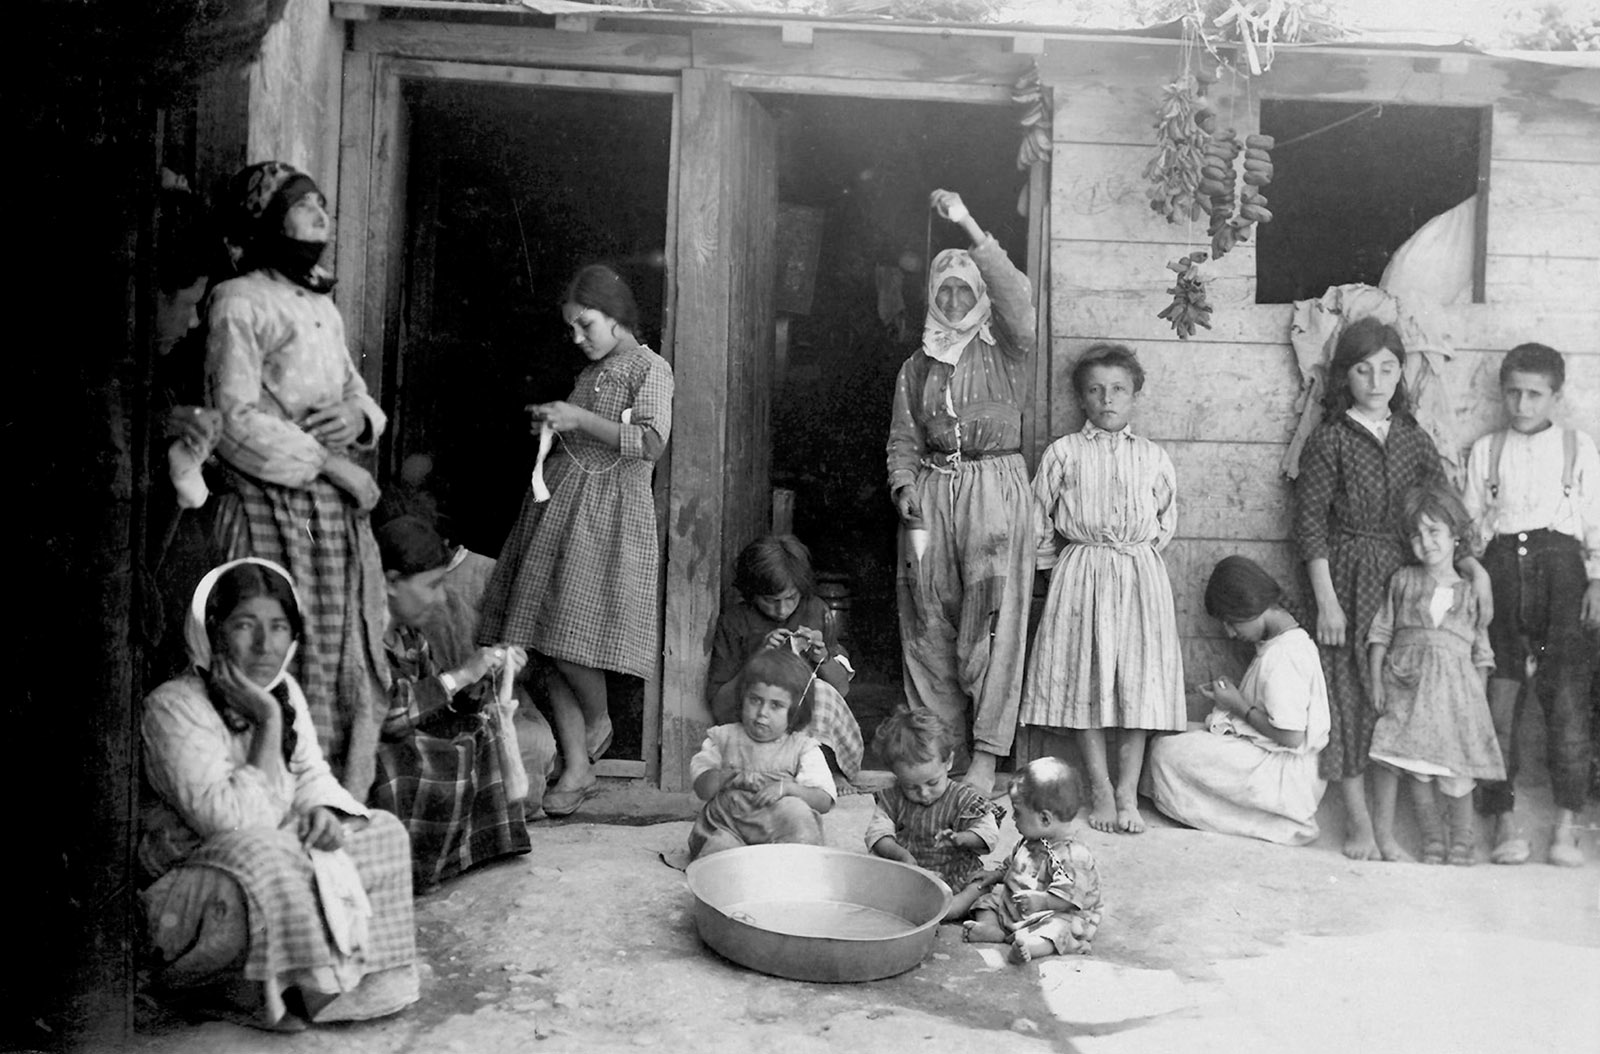 Armenian refugees in a camp at Aleppo, Syria, 1922